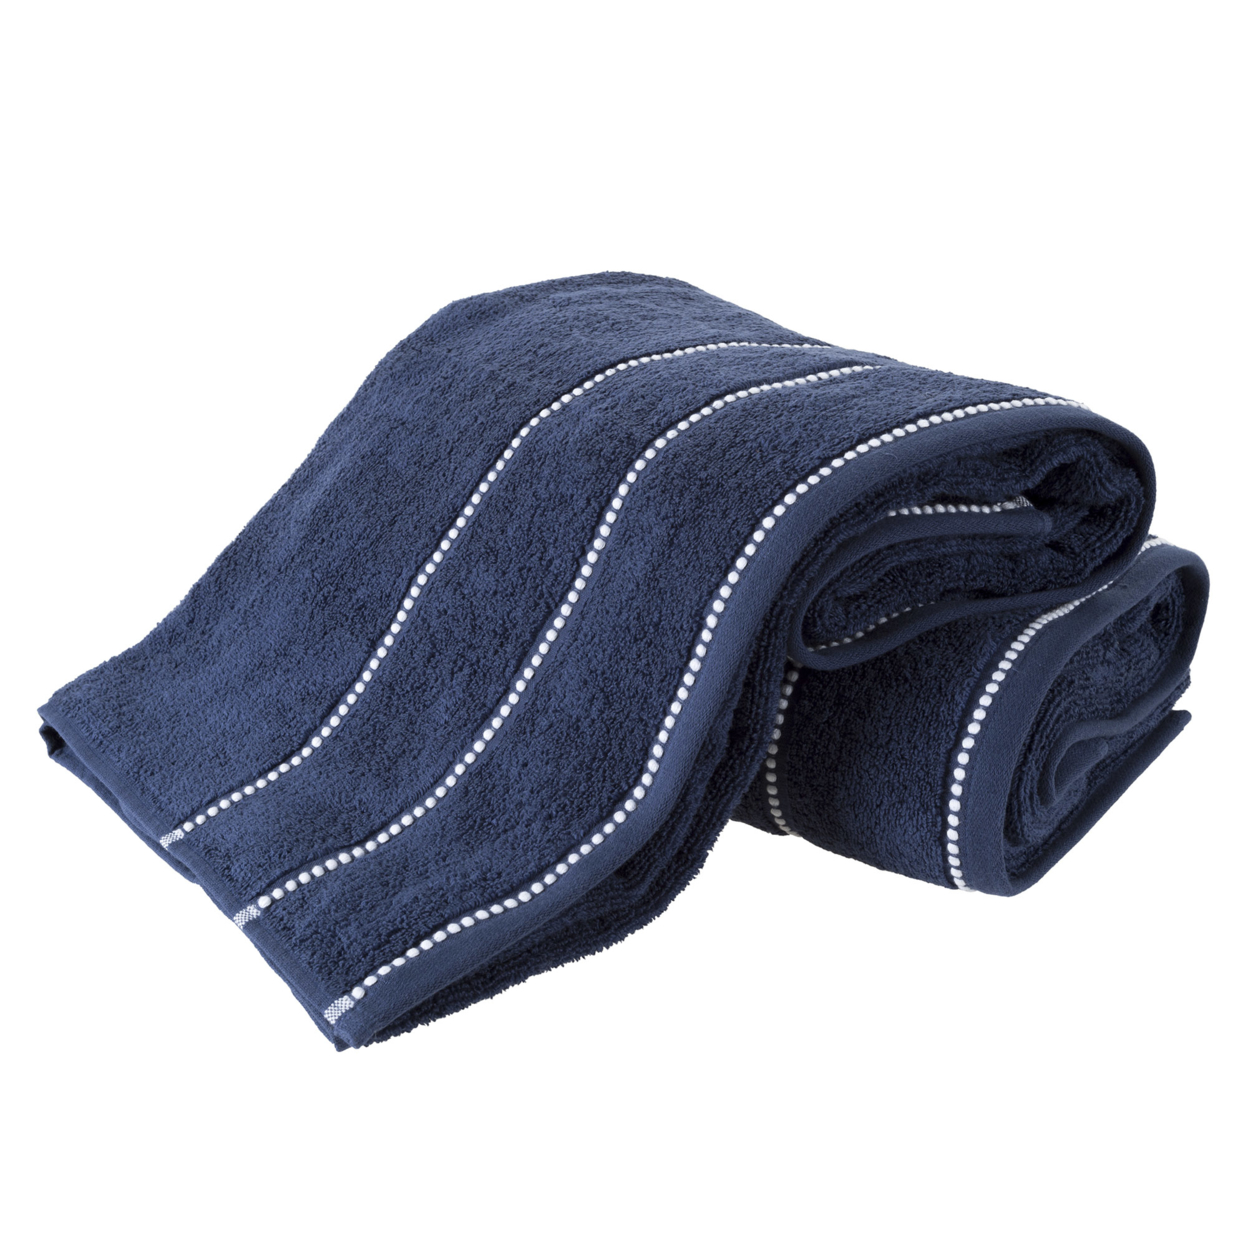 Luxurious Huge 34 X 68 In Cotton Towel Set- 2 Piece Bath Sheet Set Made From 100% Plush Cotton- Quick Dry, Soft And Absorbent Navy